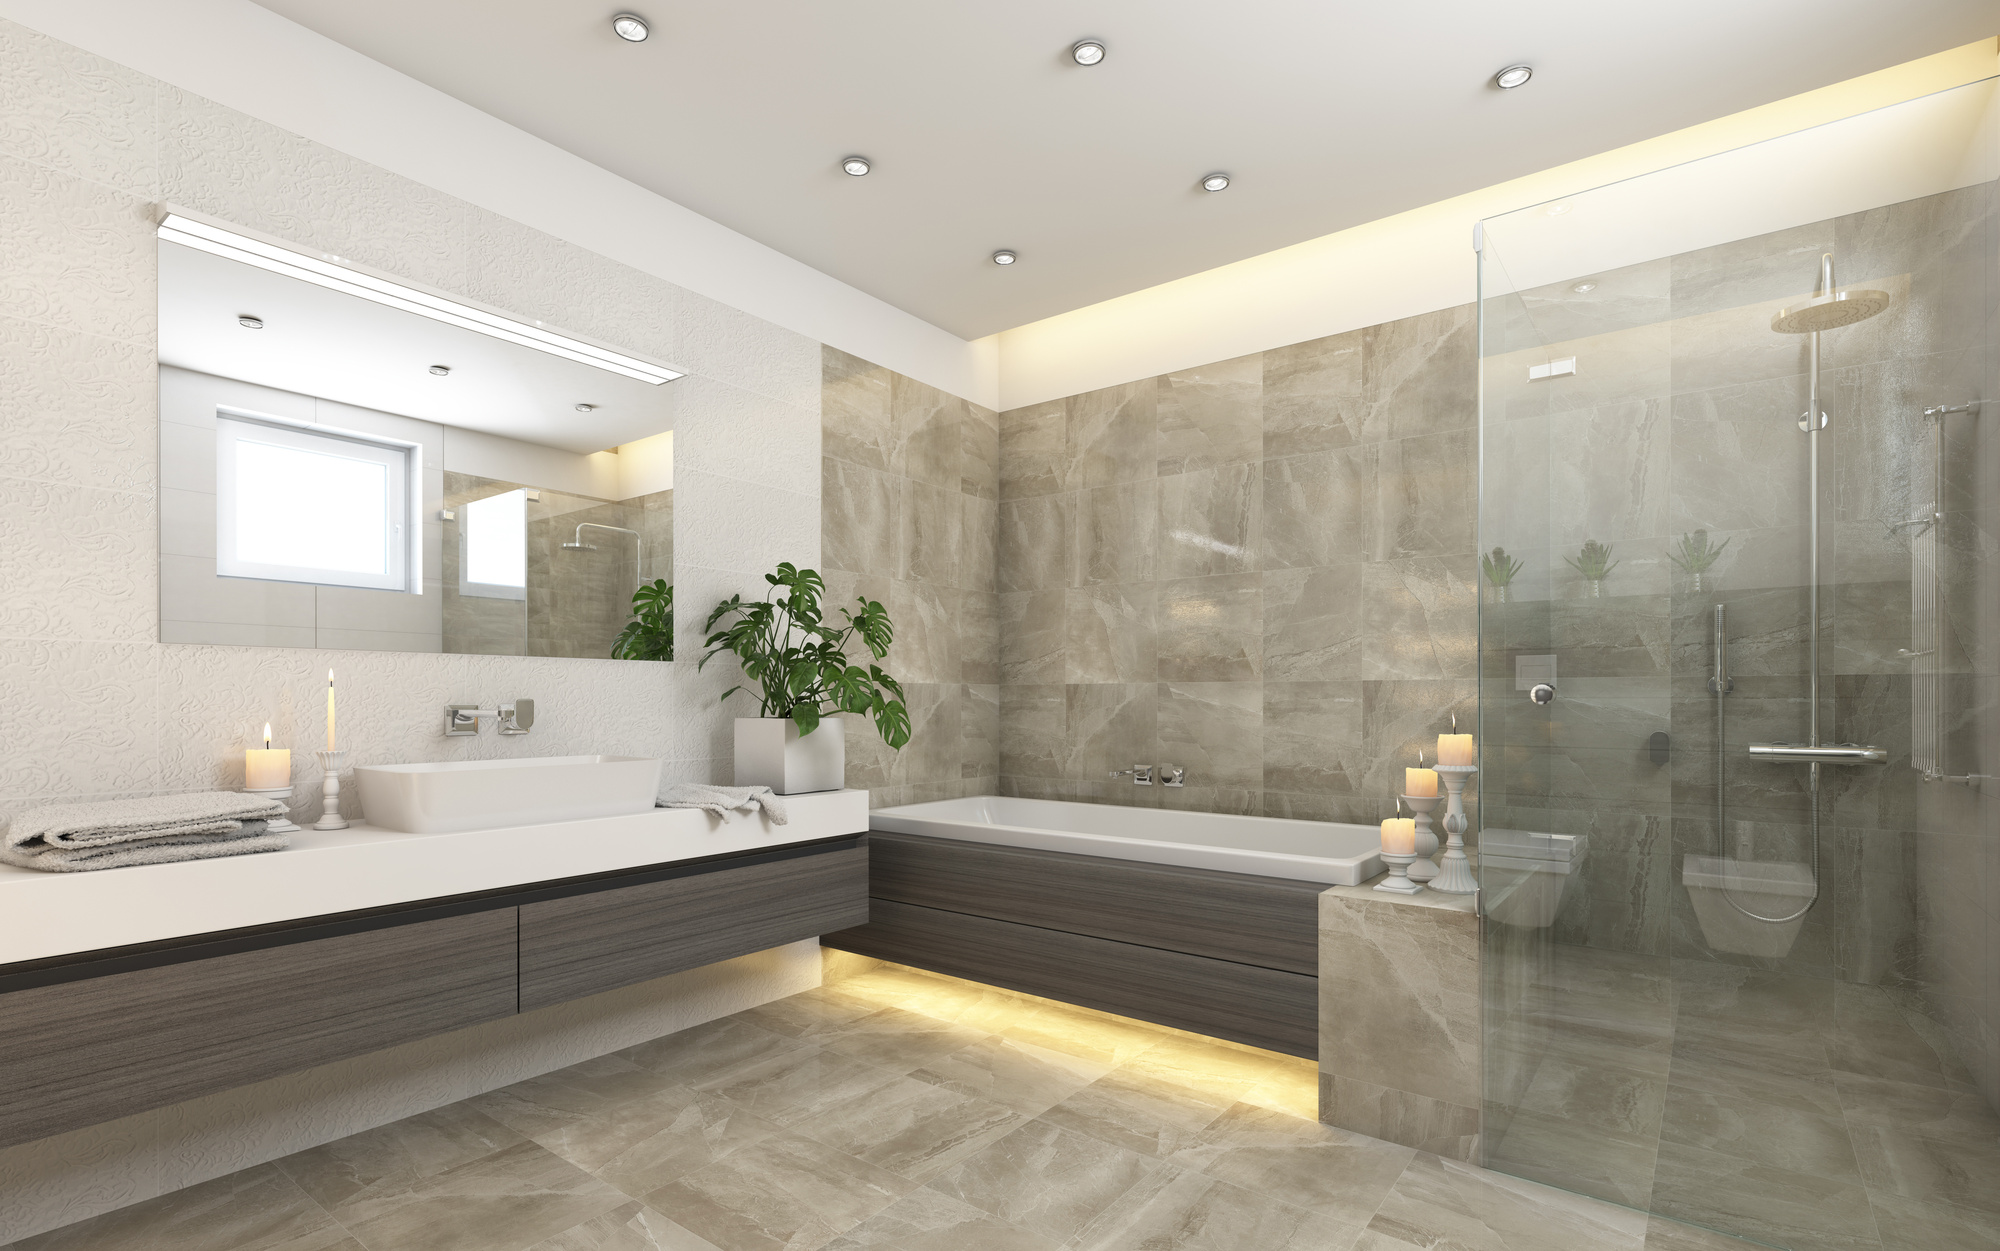 This is an image of bathroom design 